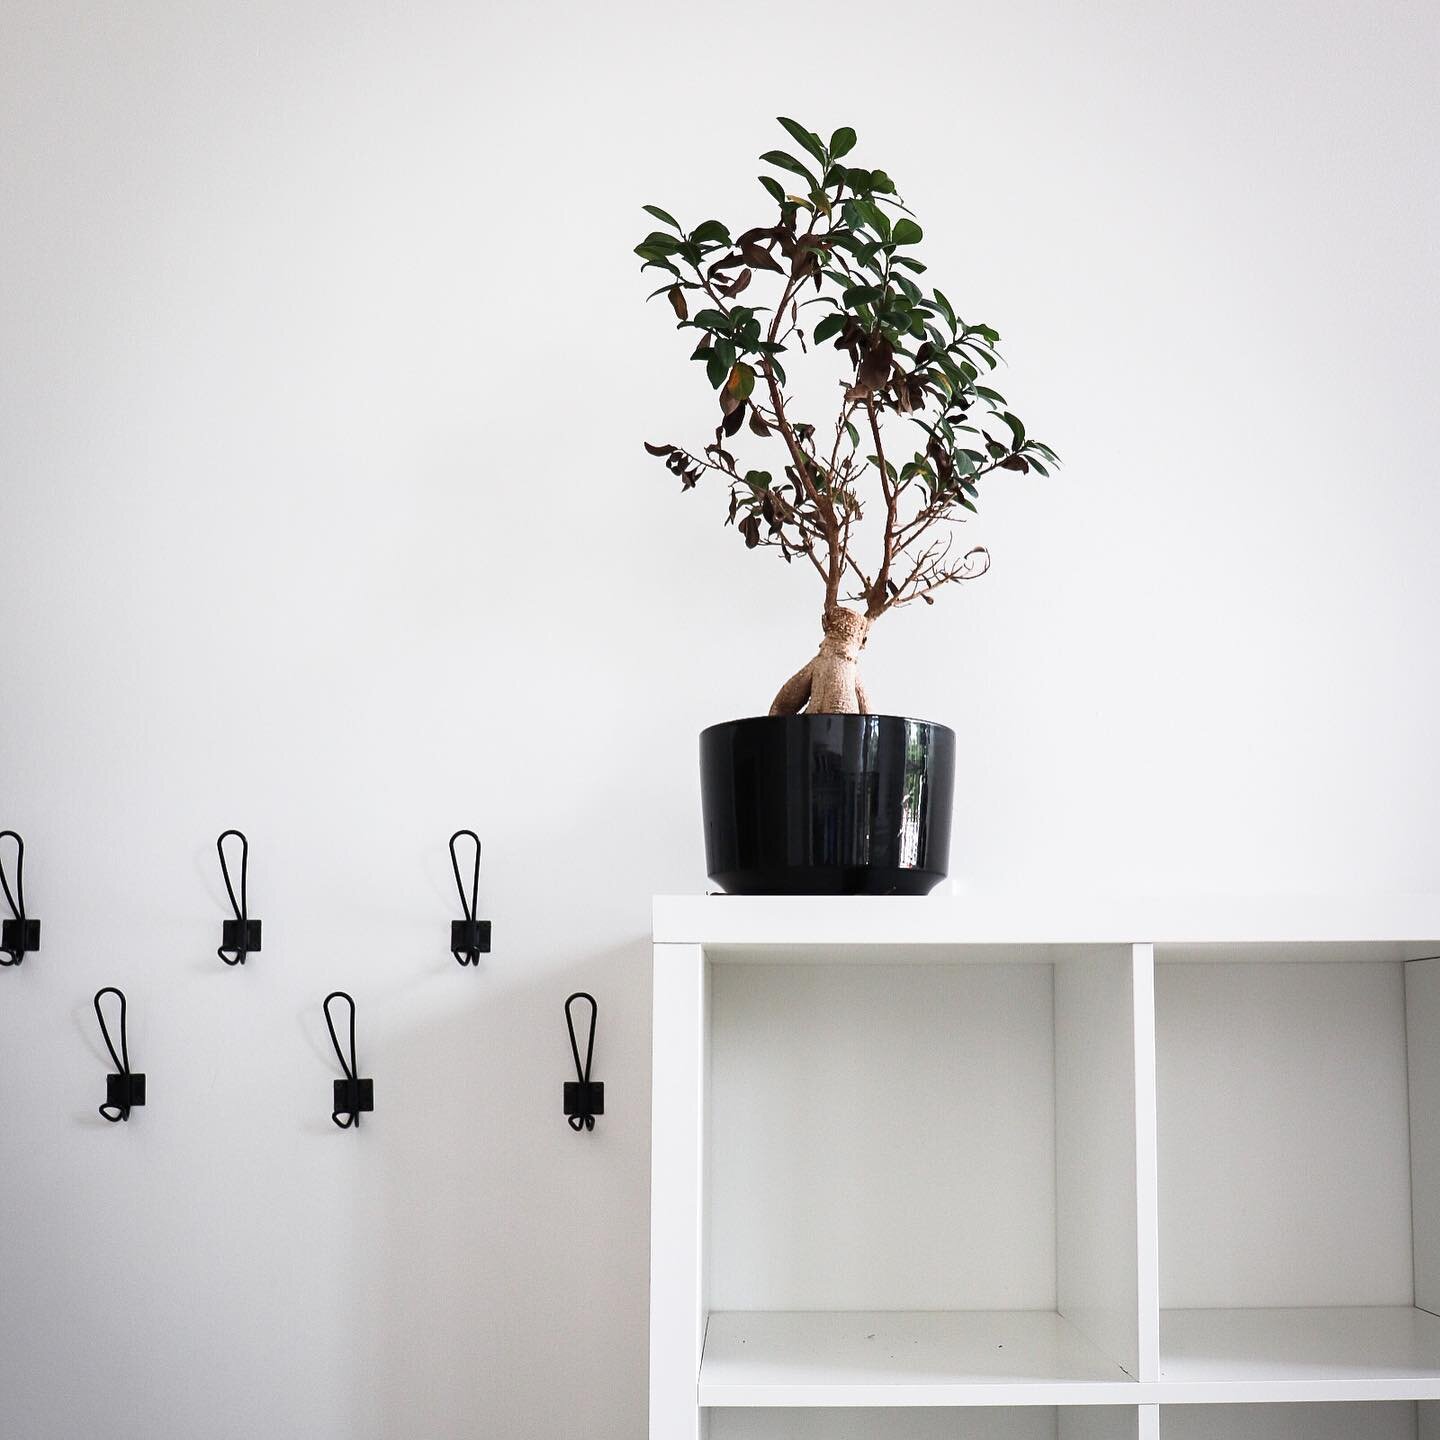 Our plants are more than just for looks, they are incredible air purifiers too!